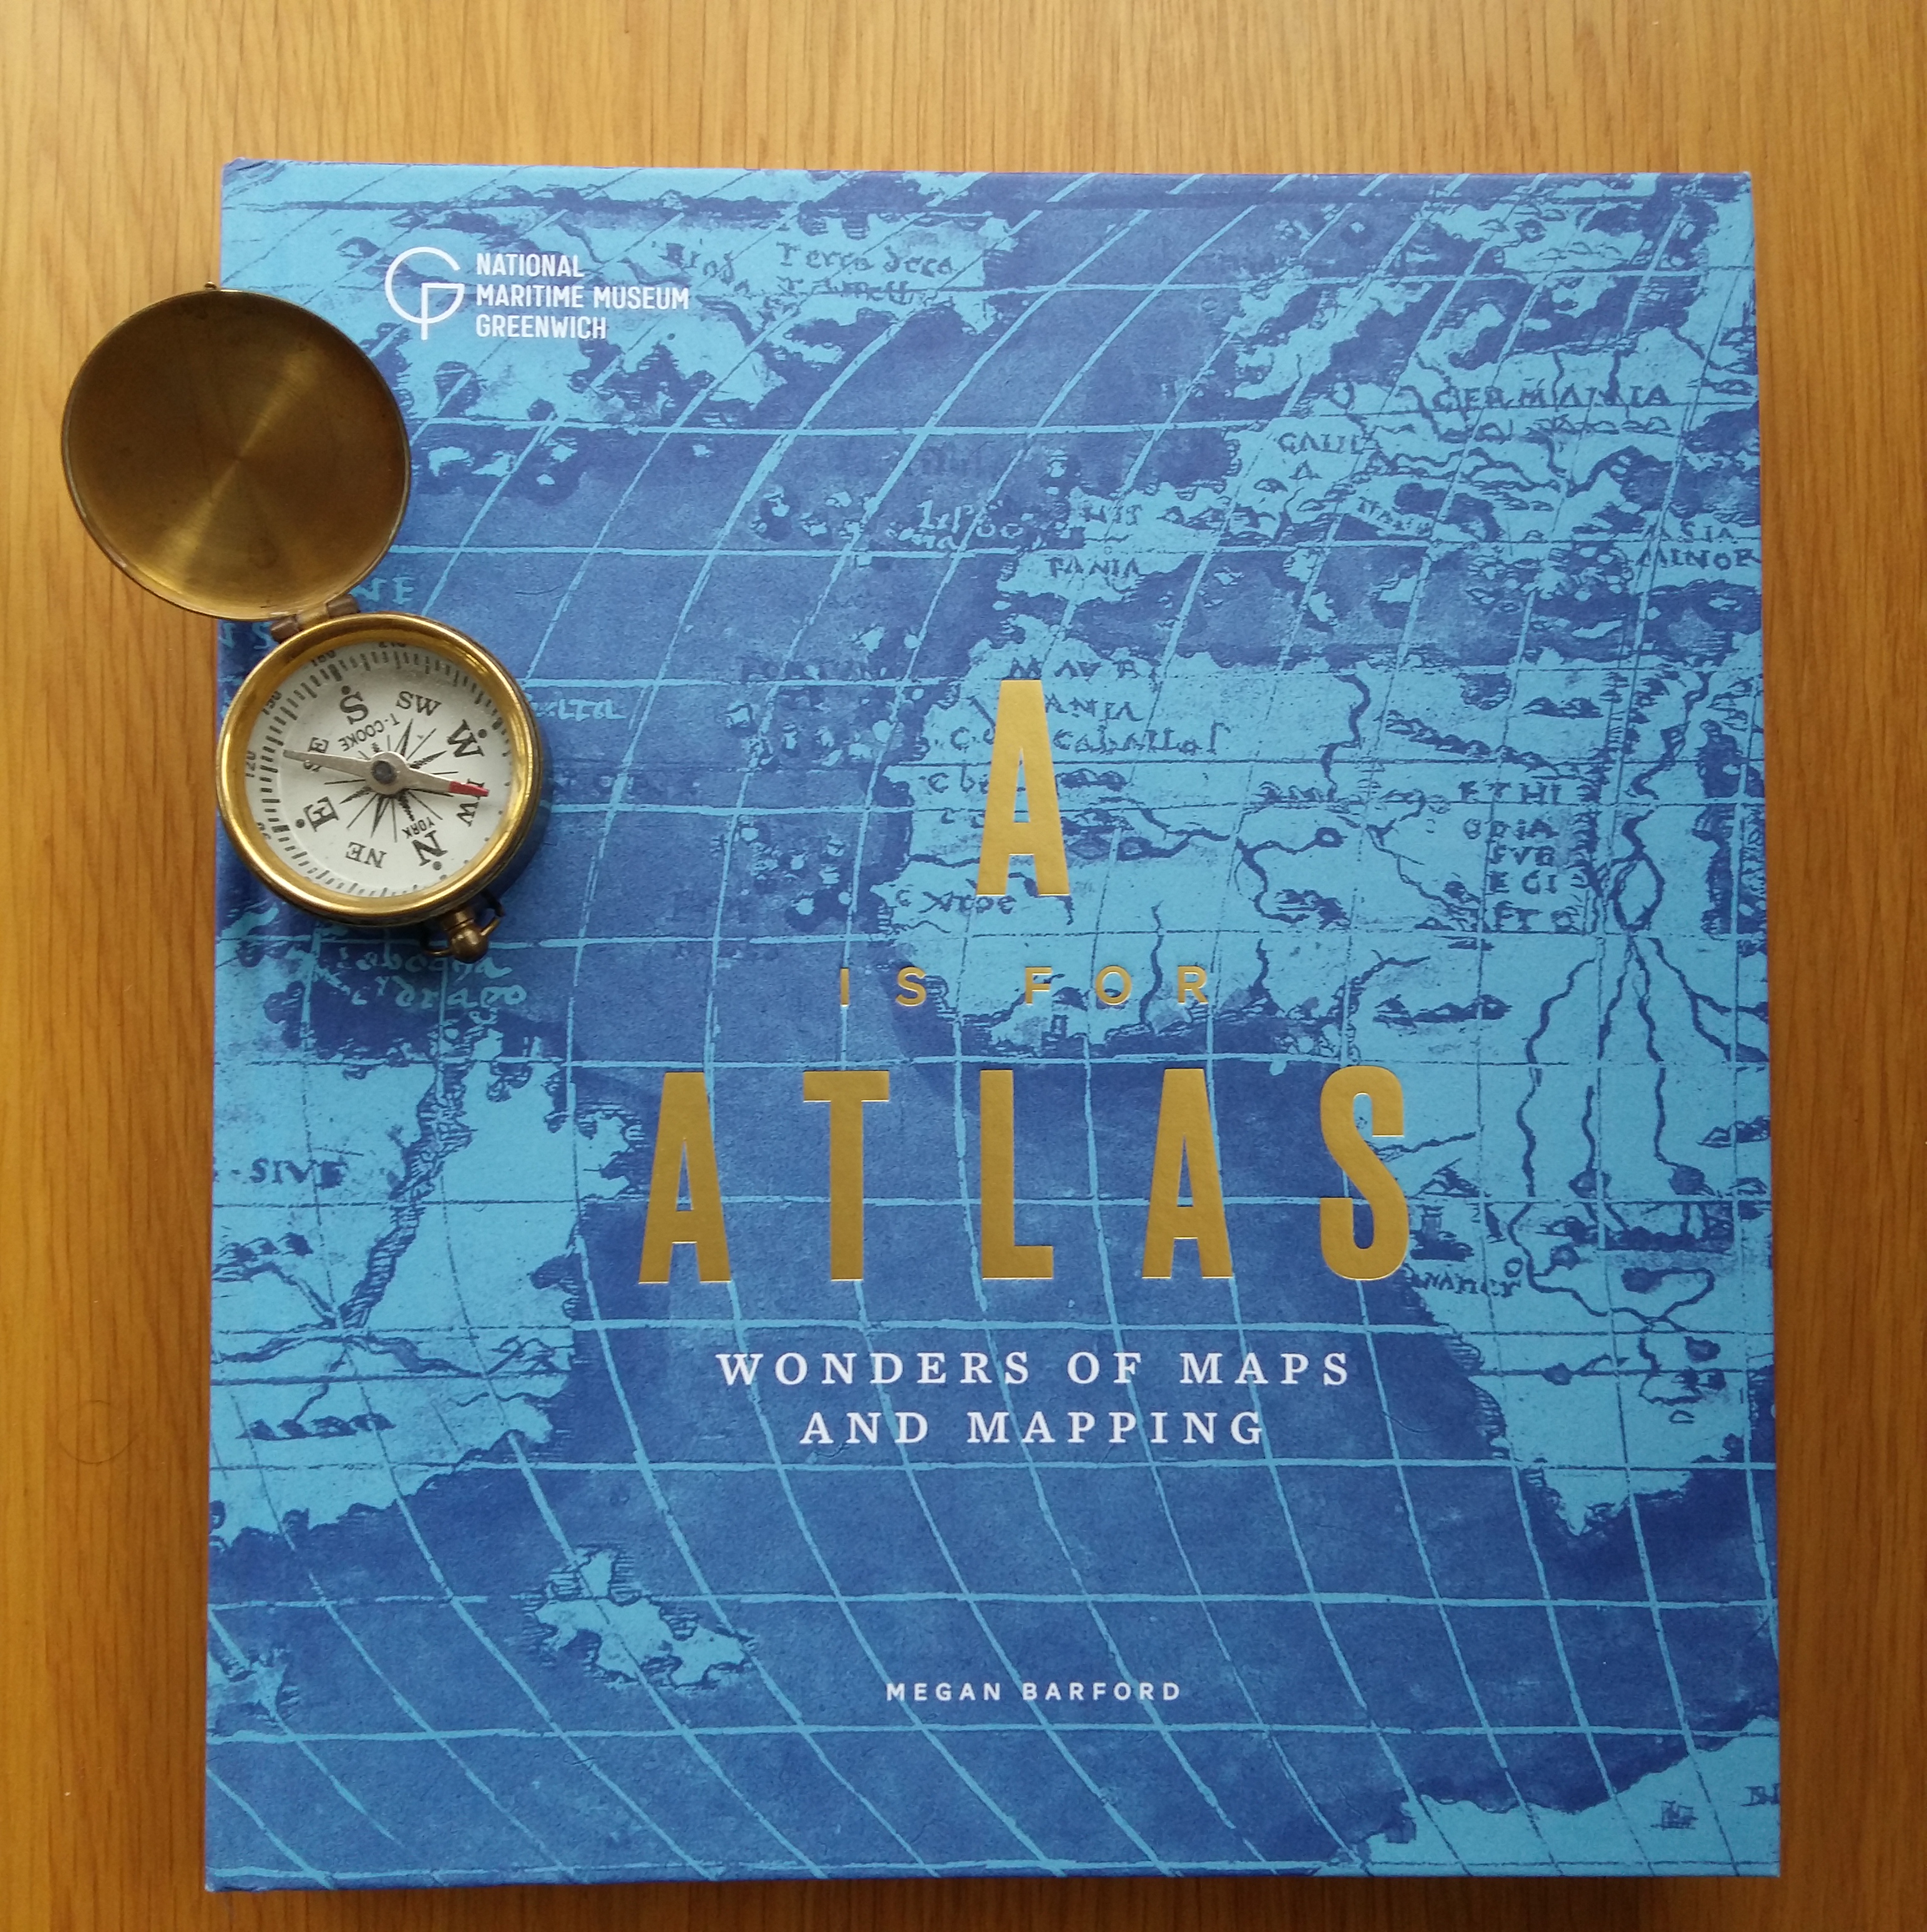 A is for Atlas